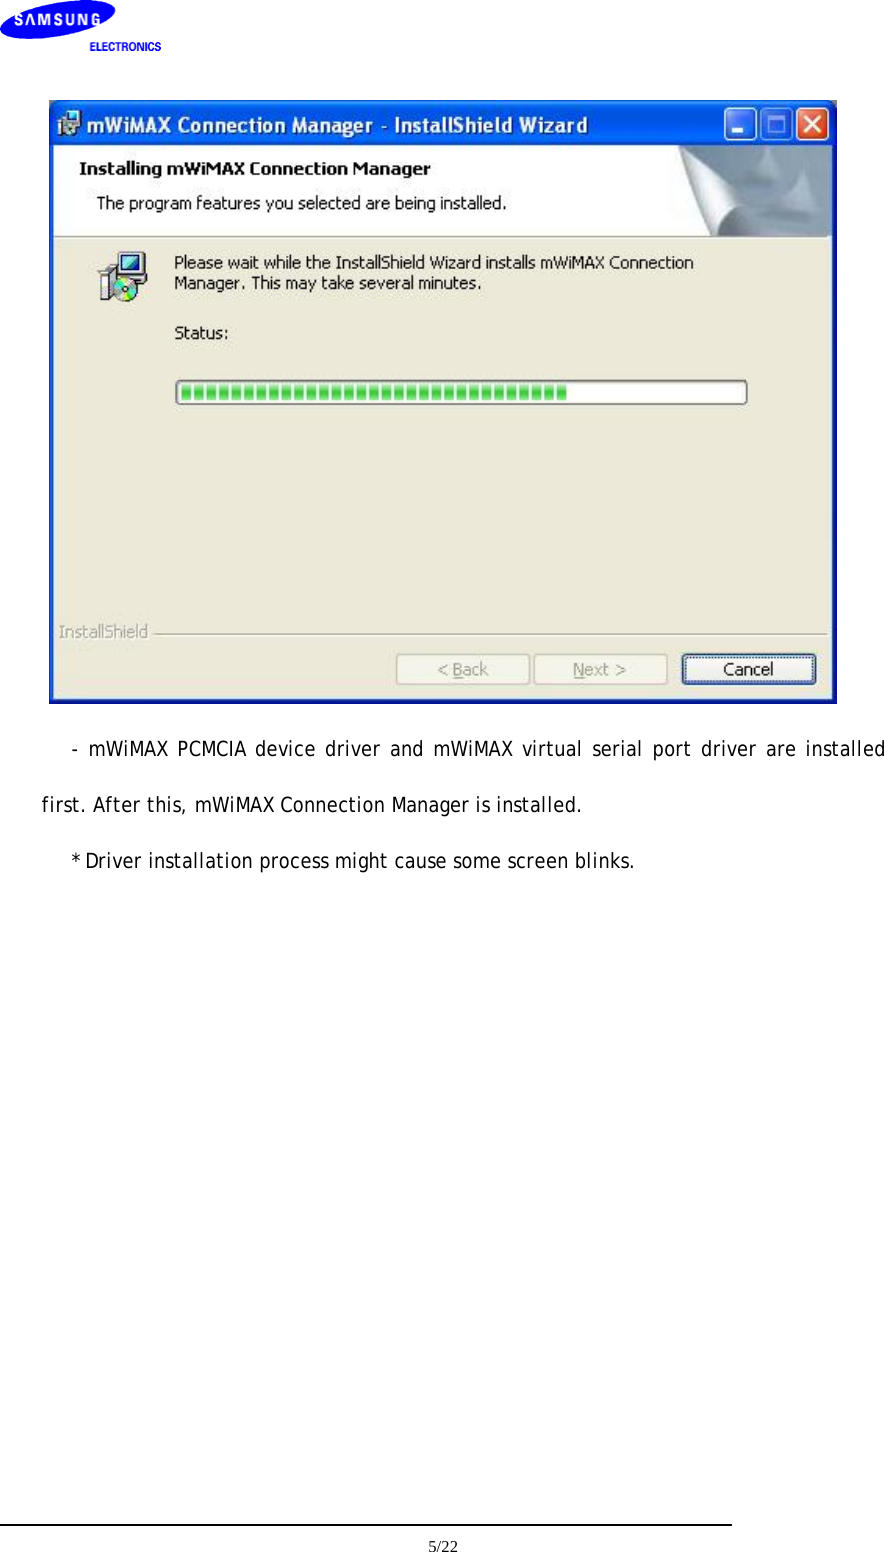     5/22   - mWiMAX PCMCIA device driver and mWiMAX virtual serial port driver are installed first. After this, mWiMAX Connection Manager is installed.  * Driver installation process might cause some screen blinks.           